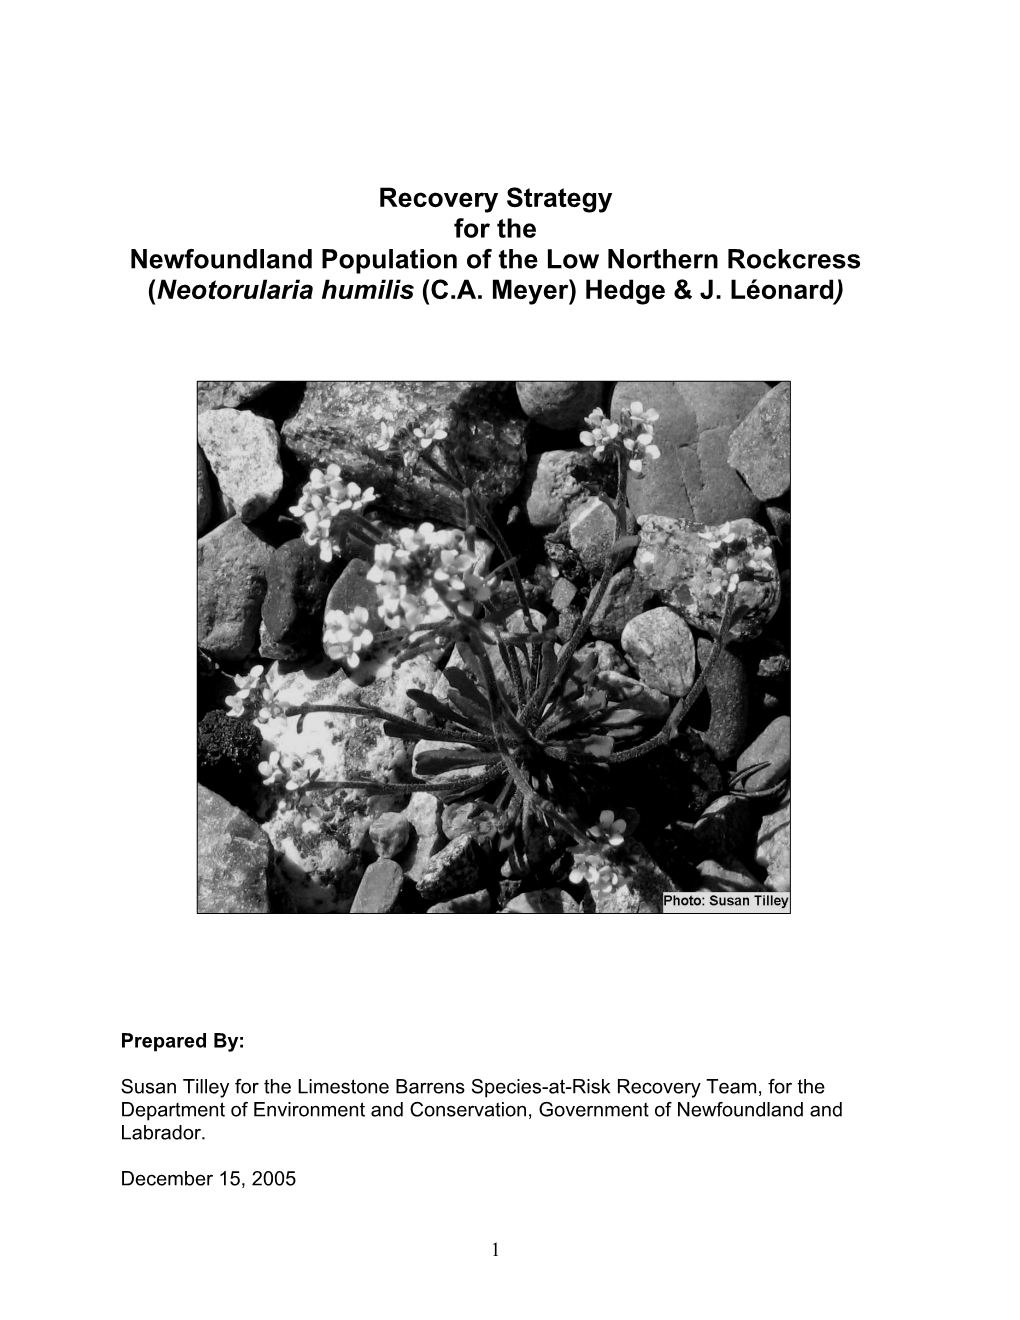 Recovery Strategy for the Newfoundland Population of the Low Northern Rockcress (Neotorularia Humilis (C.A